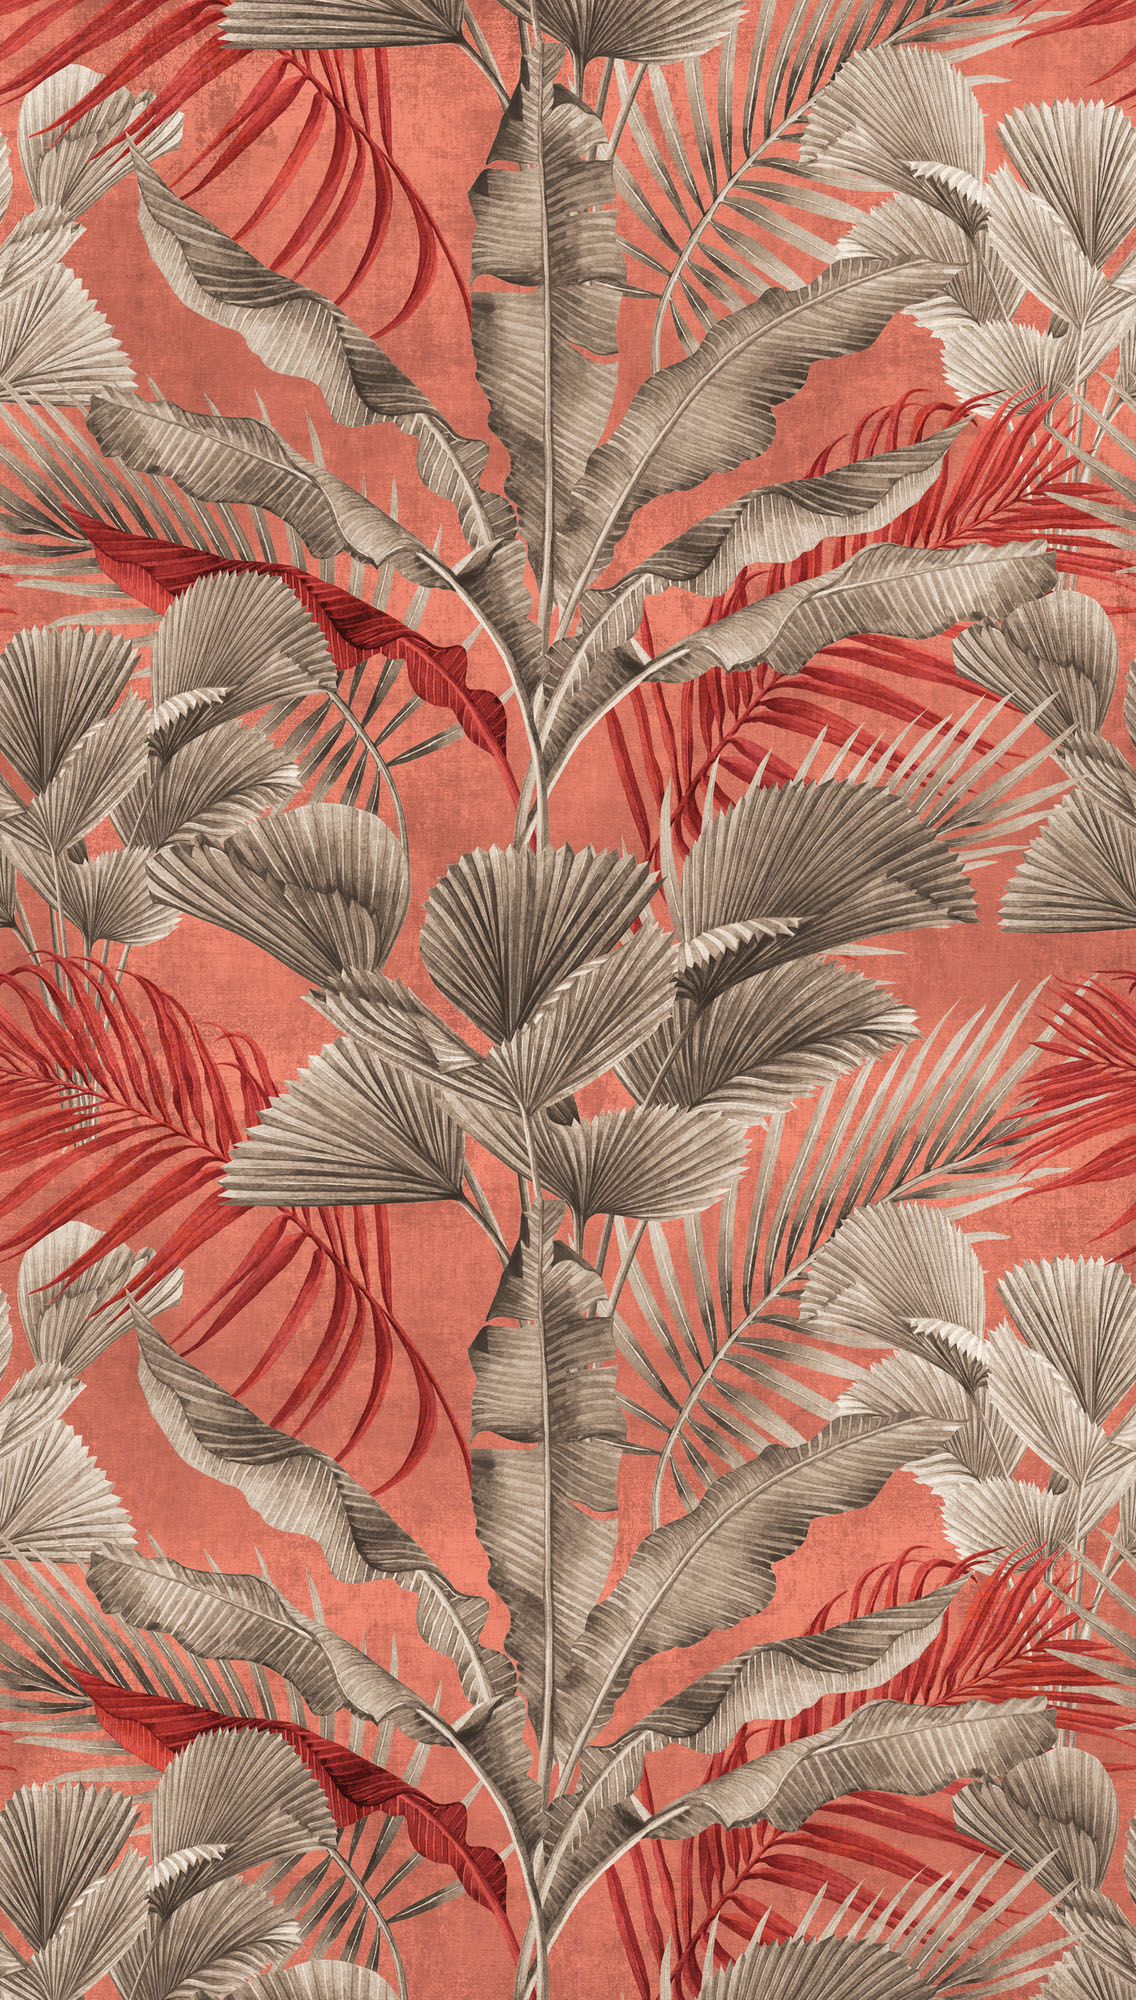 Watercolor,Painting,Coconut,banana,palm,Leaf,green,,pink,Leaves,Seamless,Pattern,Background.watercolor,Summer